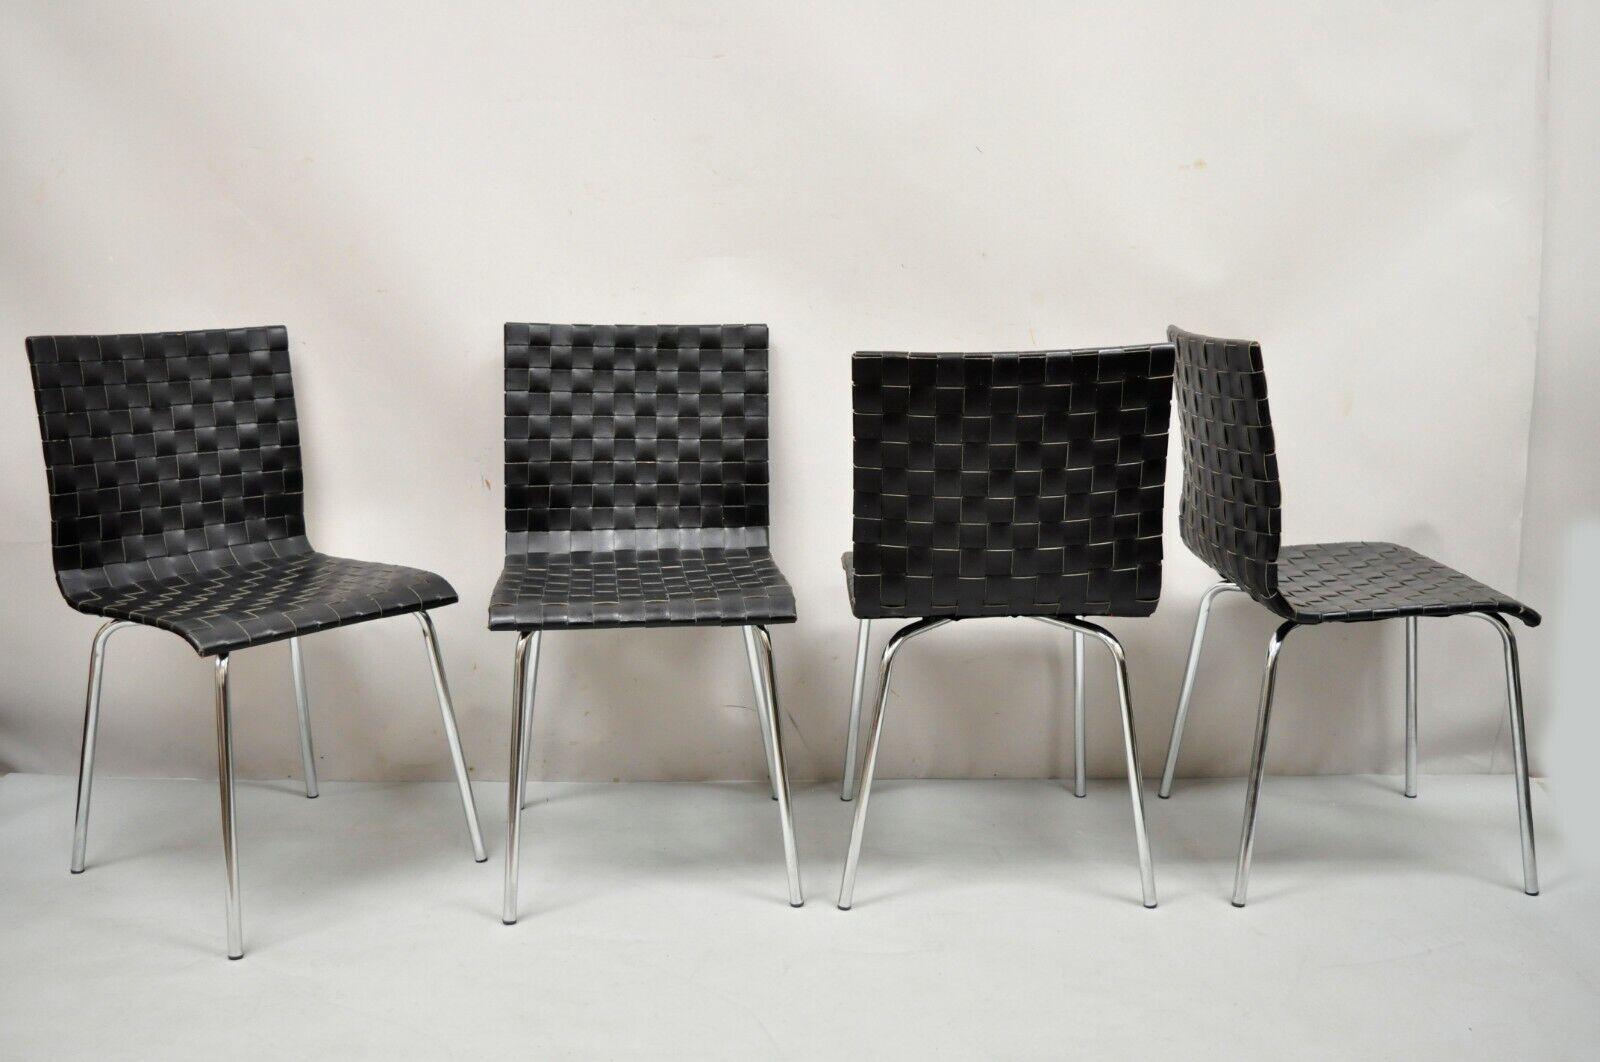 Modern Black Woven Leather Chrome Frame Dining Chairs - Set of 4 For Sale 1